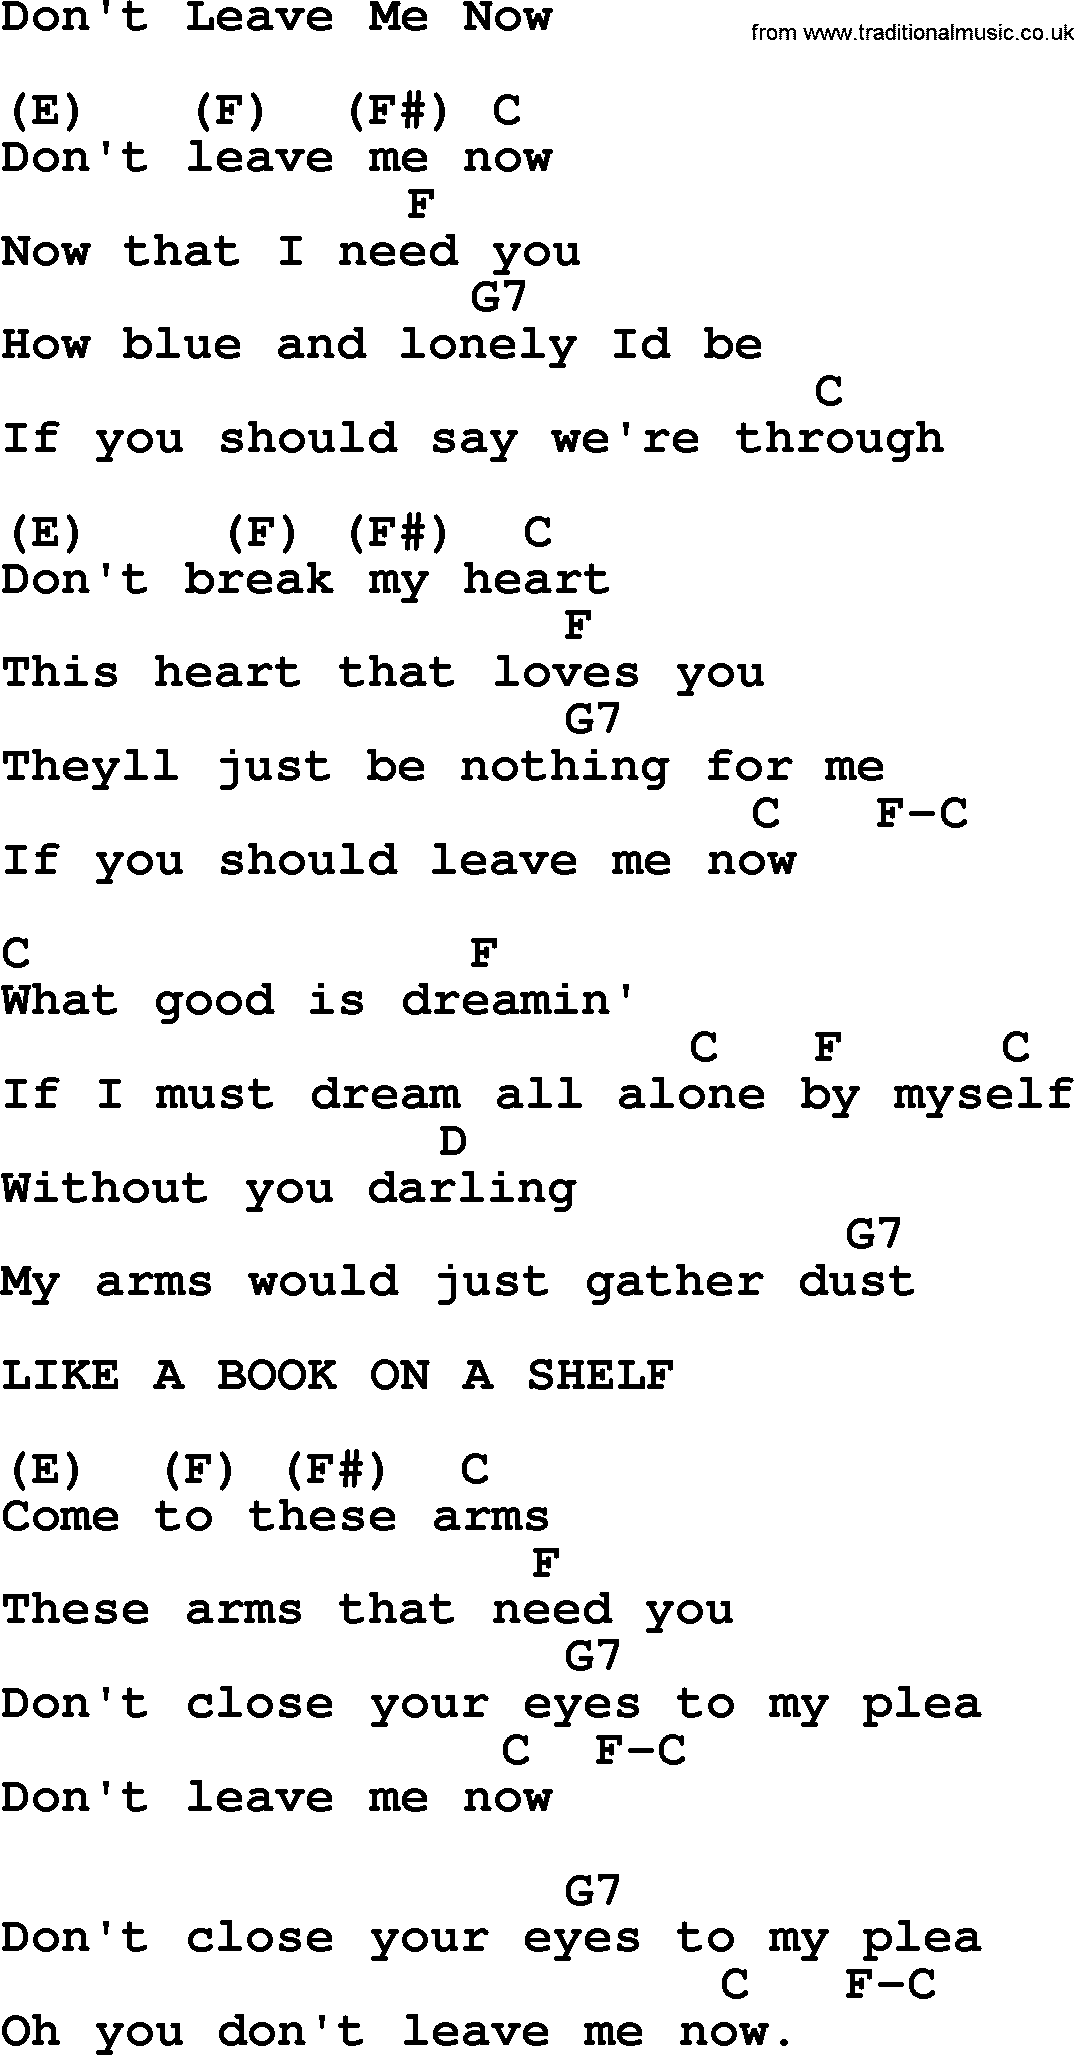 Elvis Presley song: Don't Leave Me Now, lyrics and chords